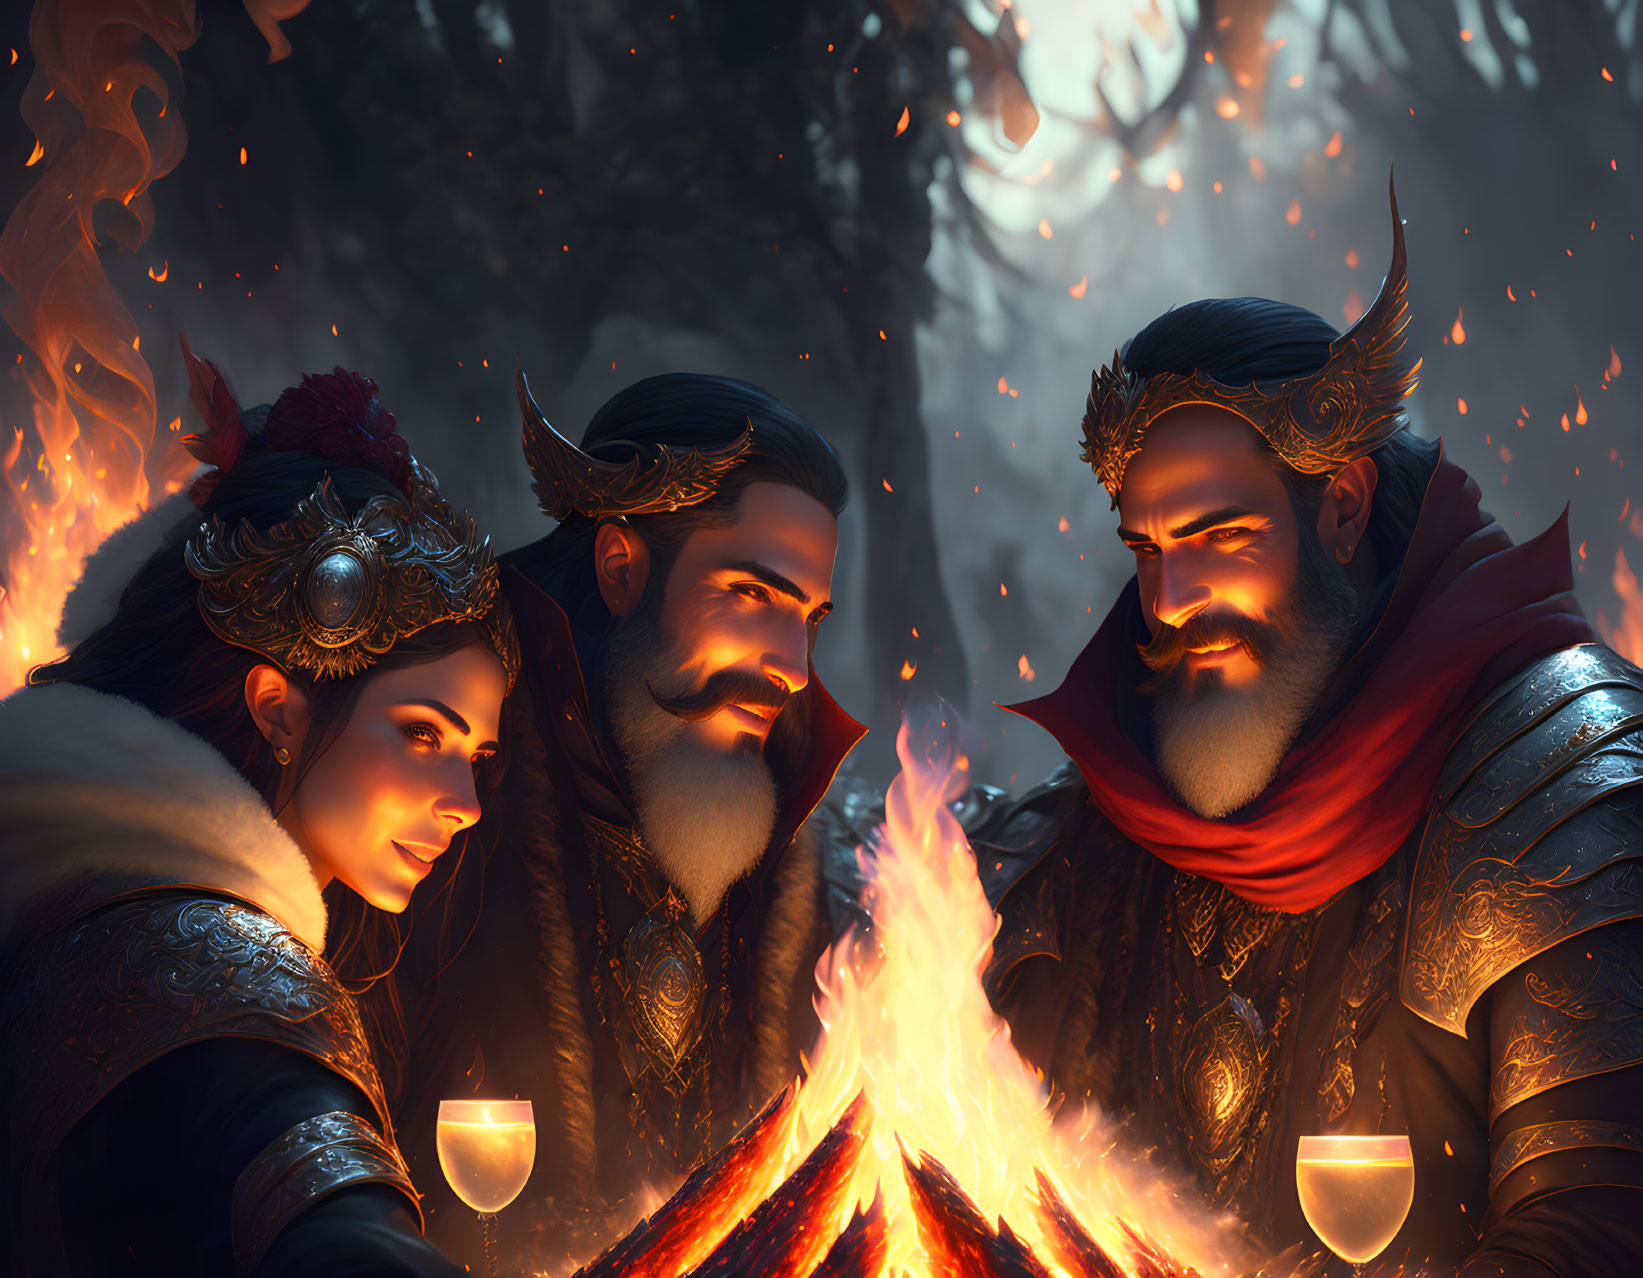 Three individuals in ornate armor around a glowing campfire